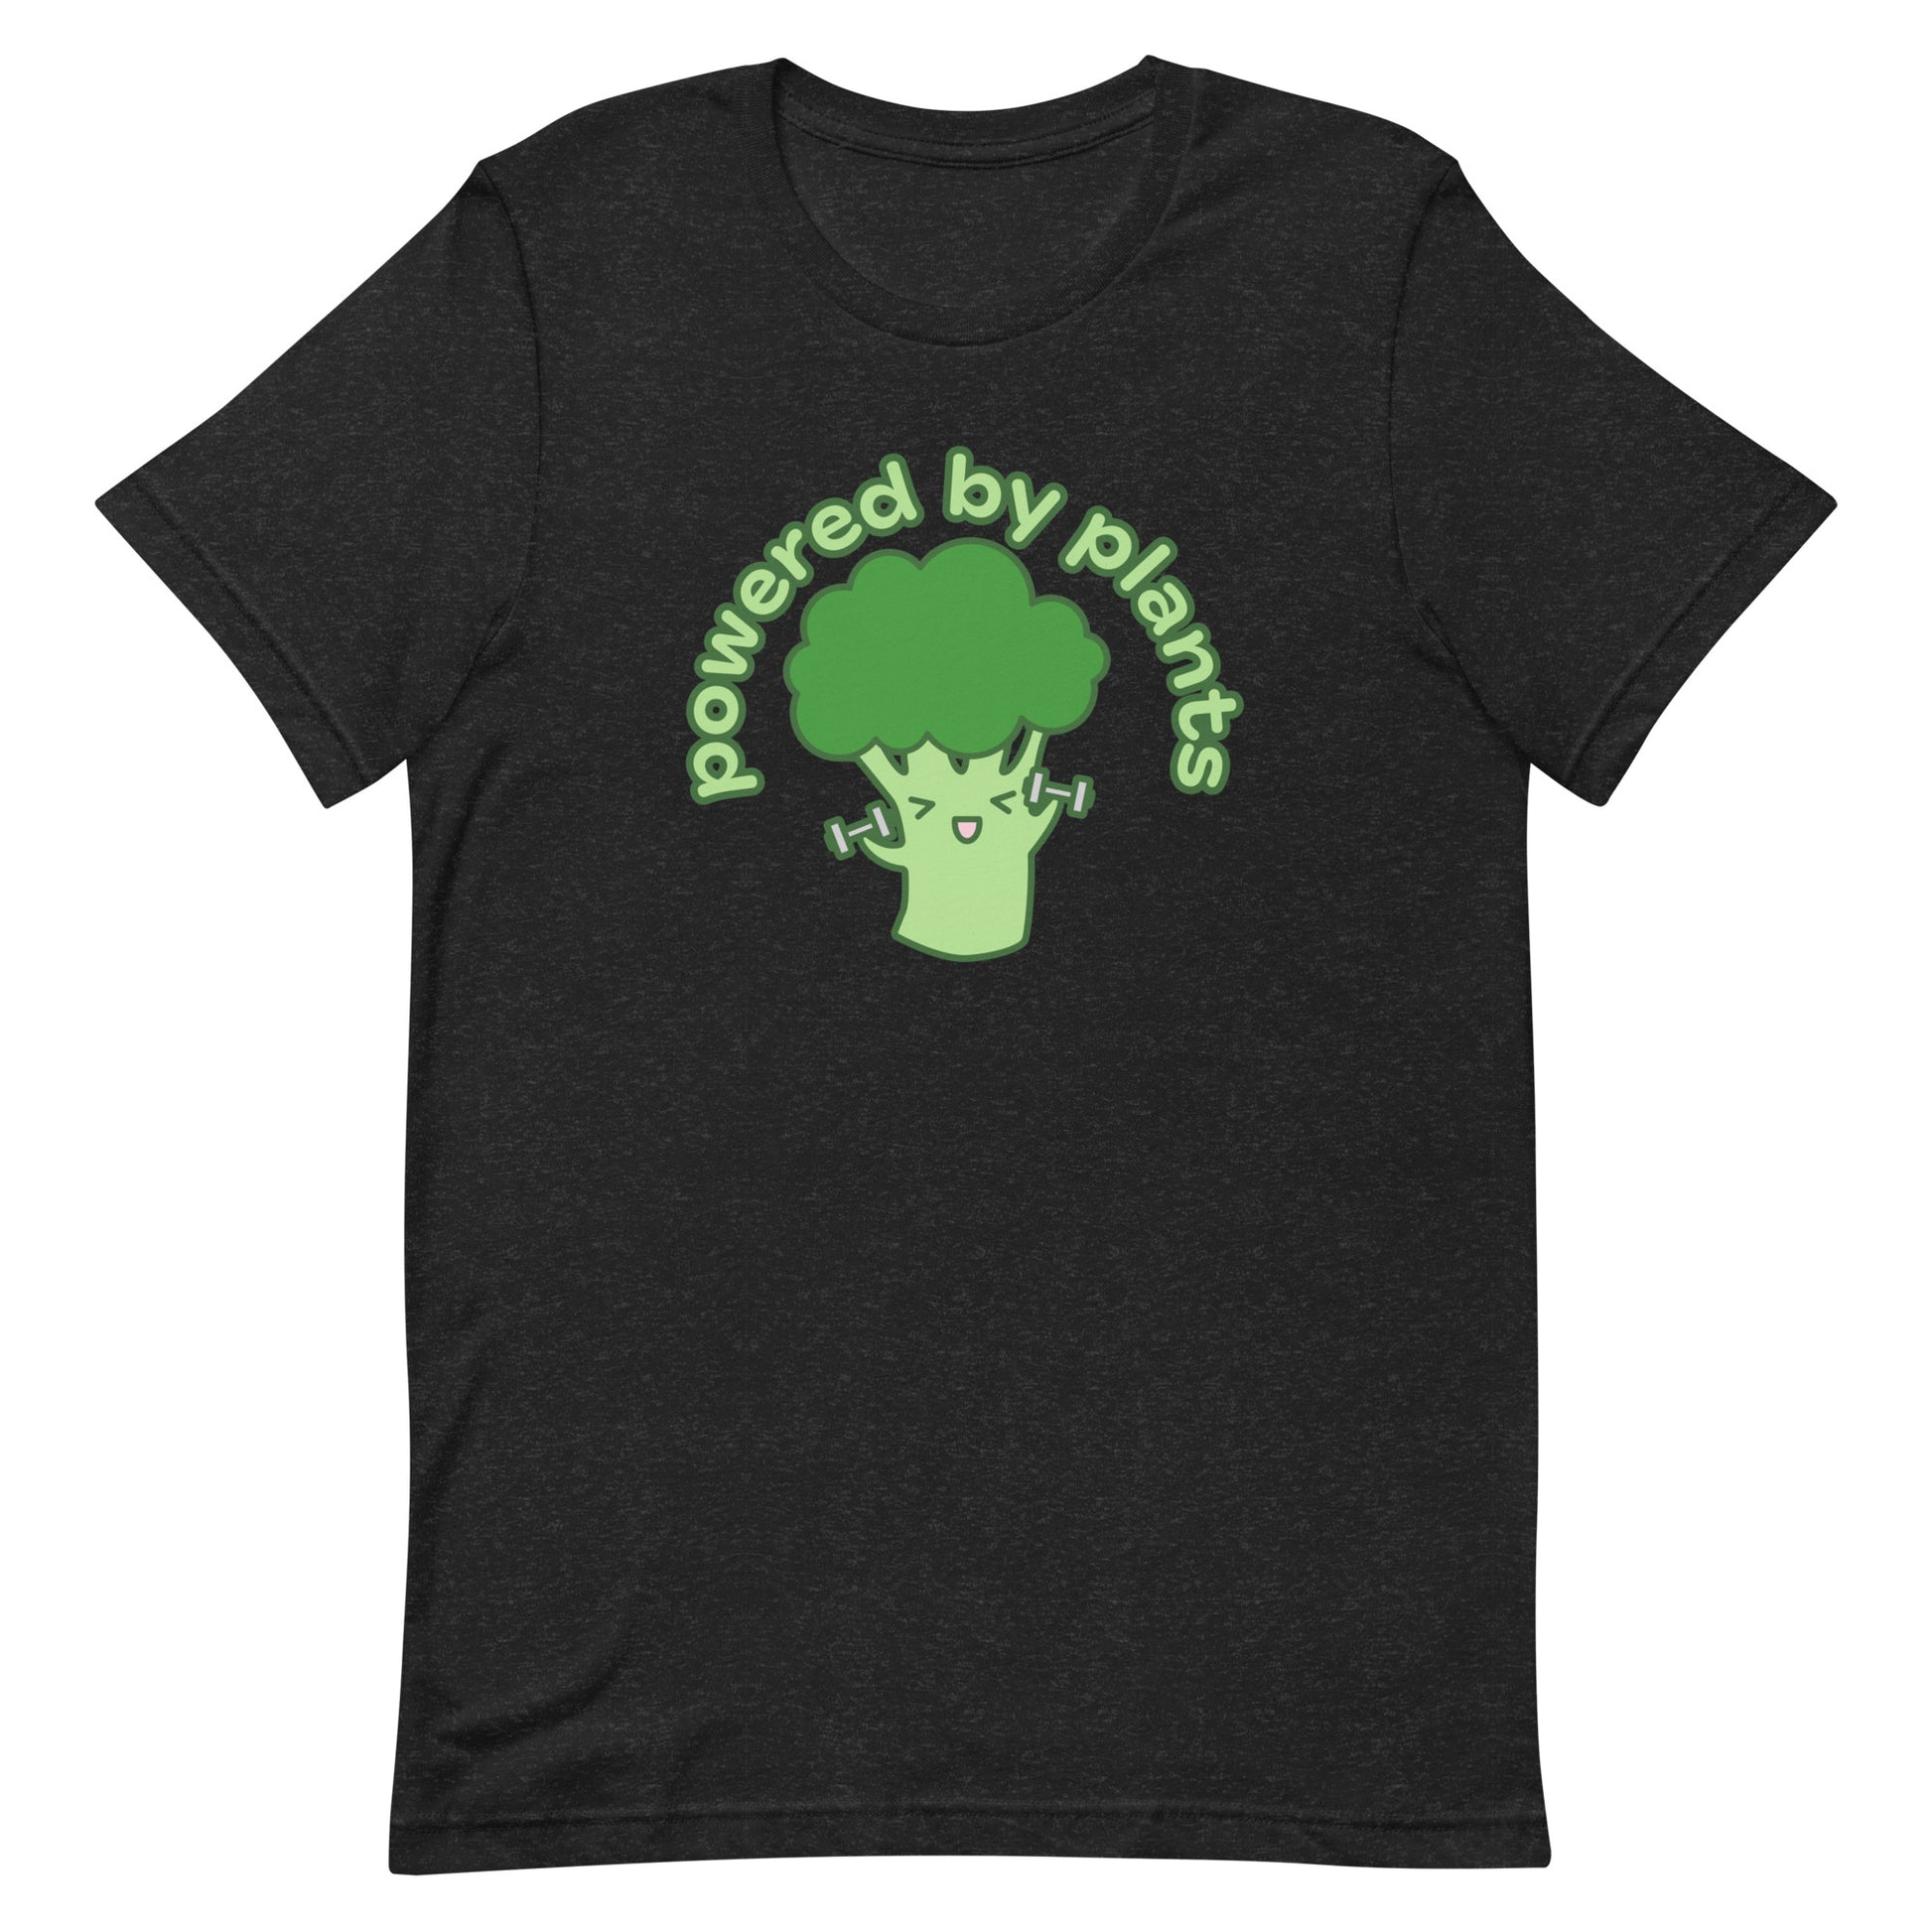 A heathered black crewneck t-shirt featuring an illustration of a cartoon broccoli character. The broccoli is excitedly lifting weights, and text in an arc above the broccoli reads "powered by plants".